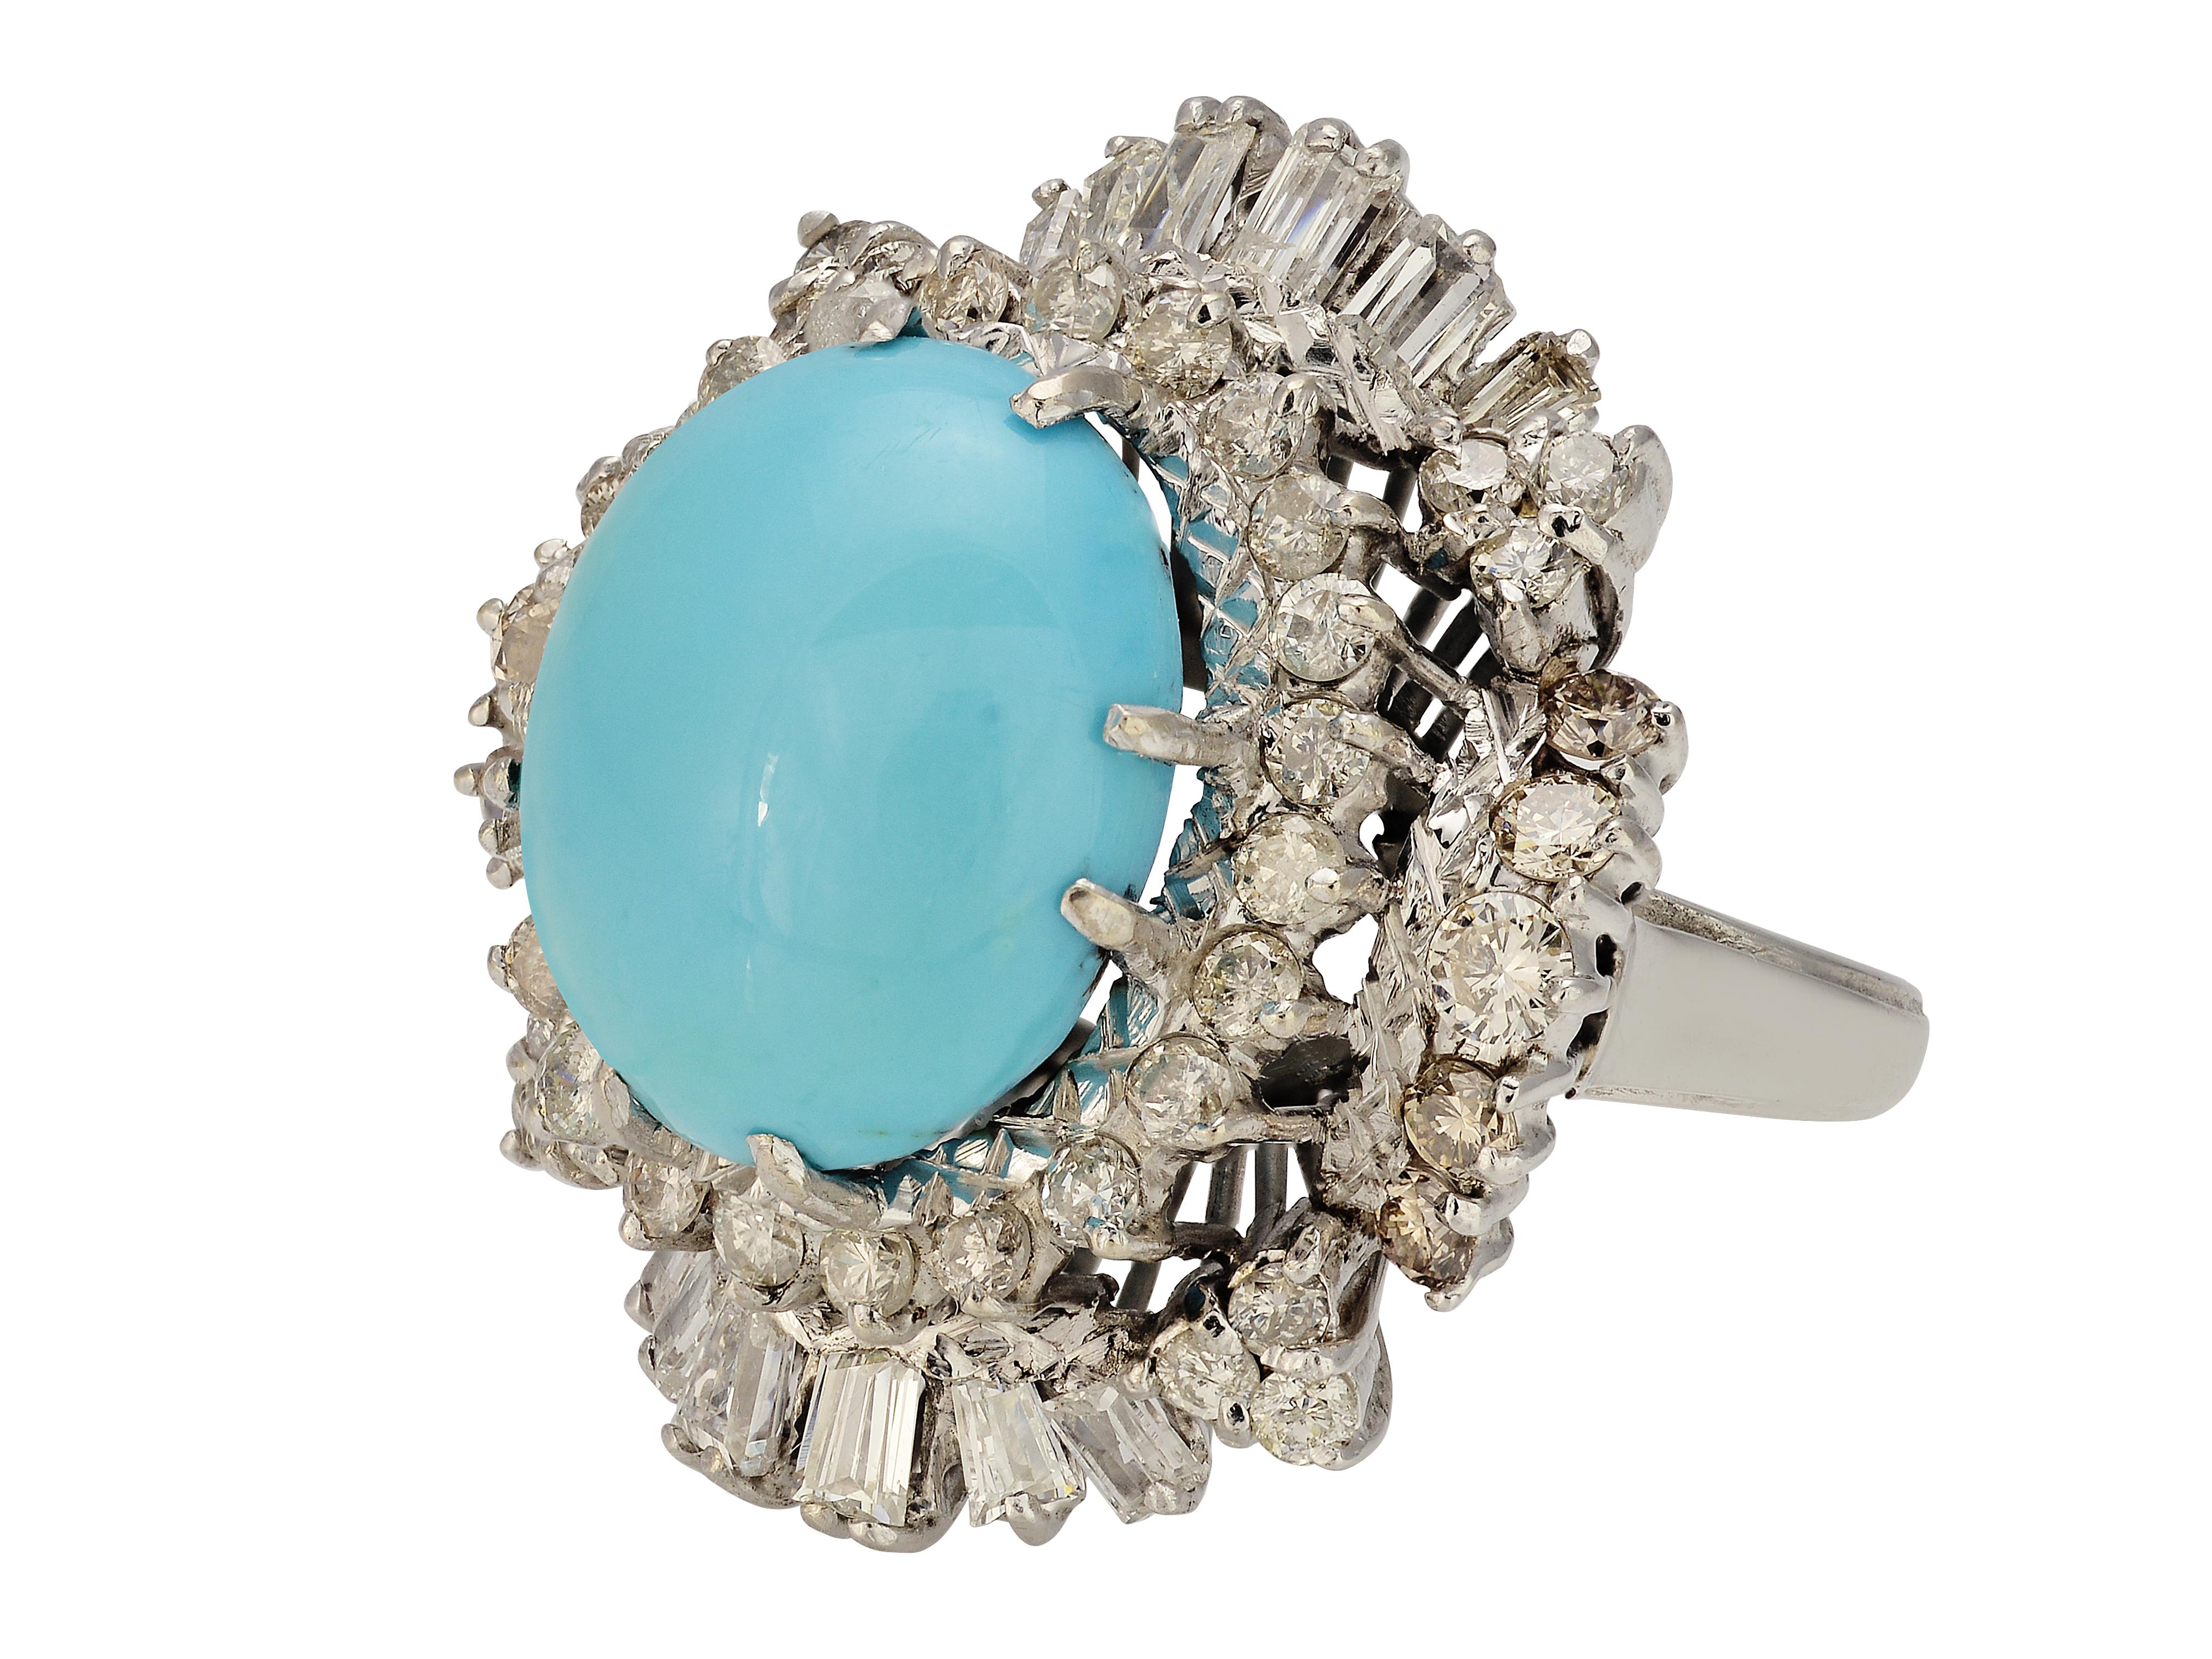 18 karat white gold vintage ballerina style cocktail ring featuring a gorgeous robin's egg blue Persian turquoise cabochon center measuring 12.5mm x 14.5mm. The turquoise is surrounded by 67 round and baguette diamonds totaling approximately 2